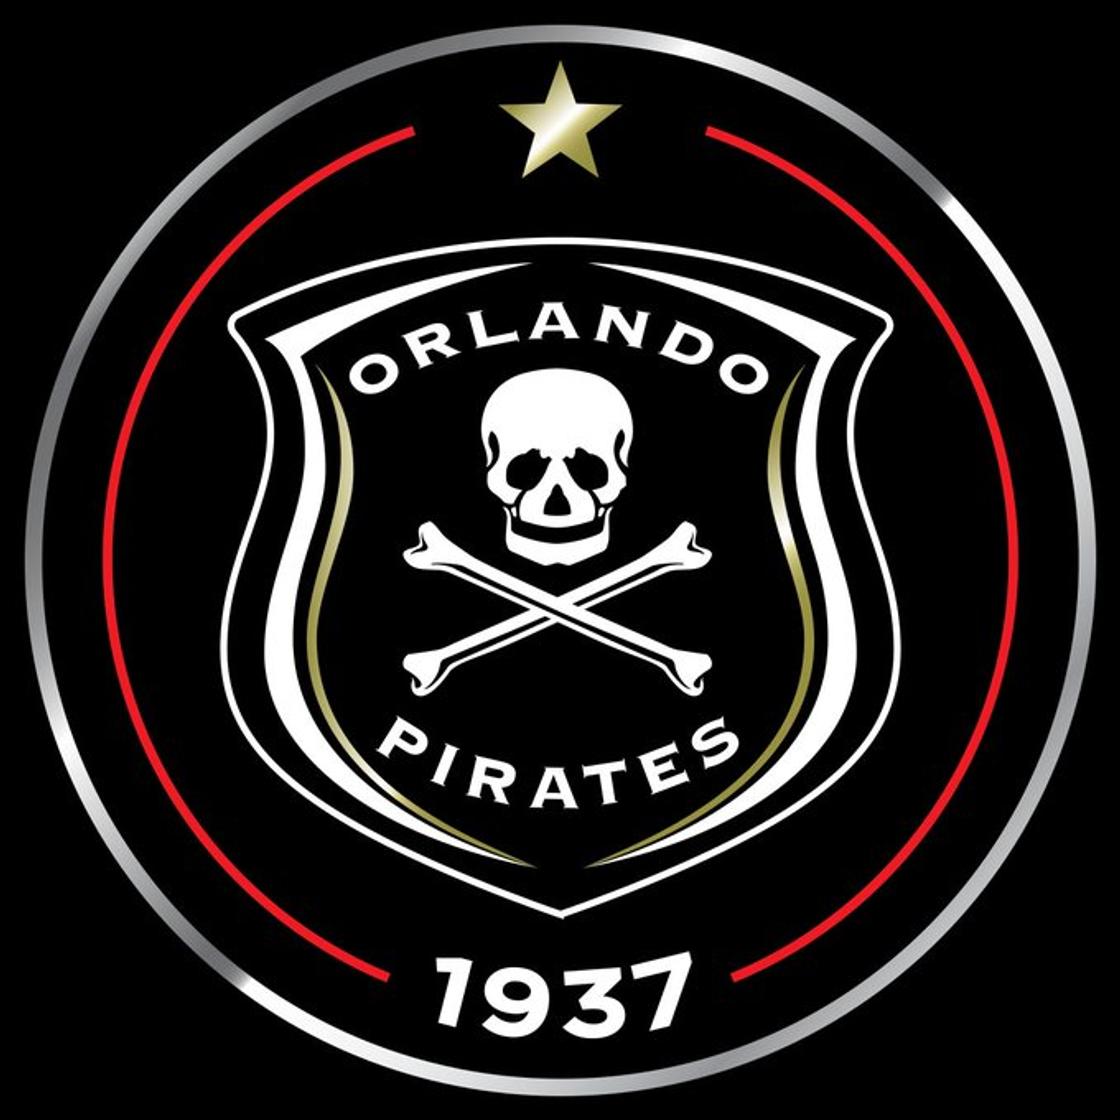 Fans divided over new Orlando Pirates jersey